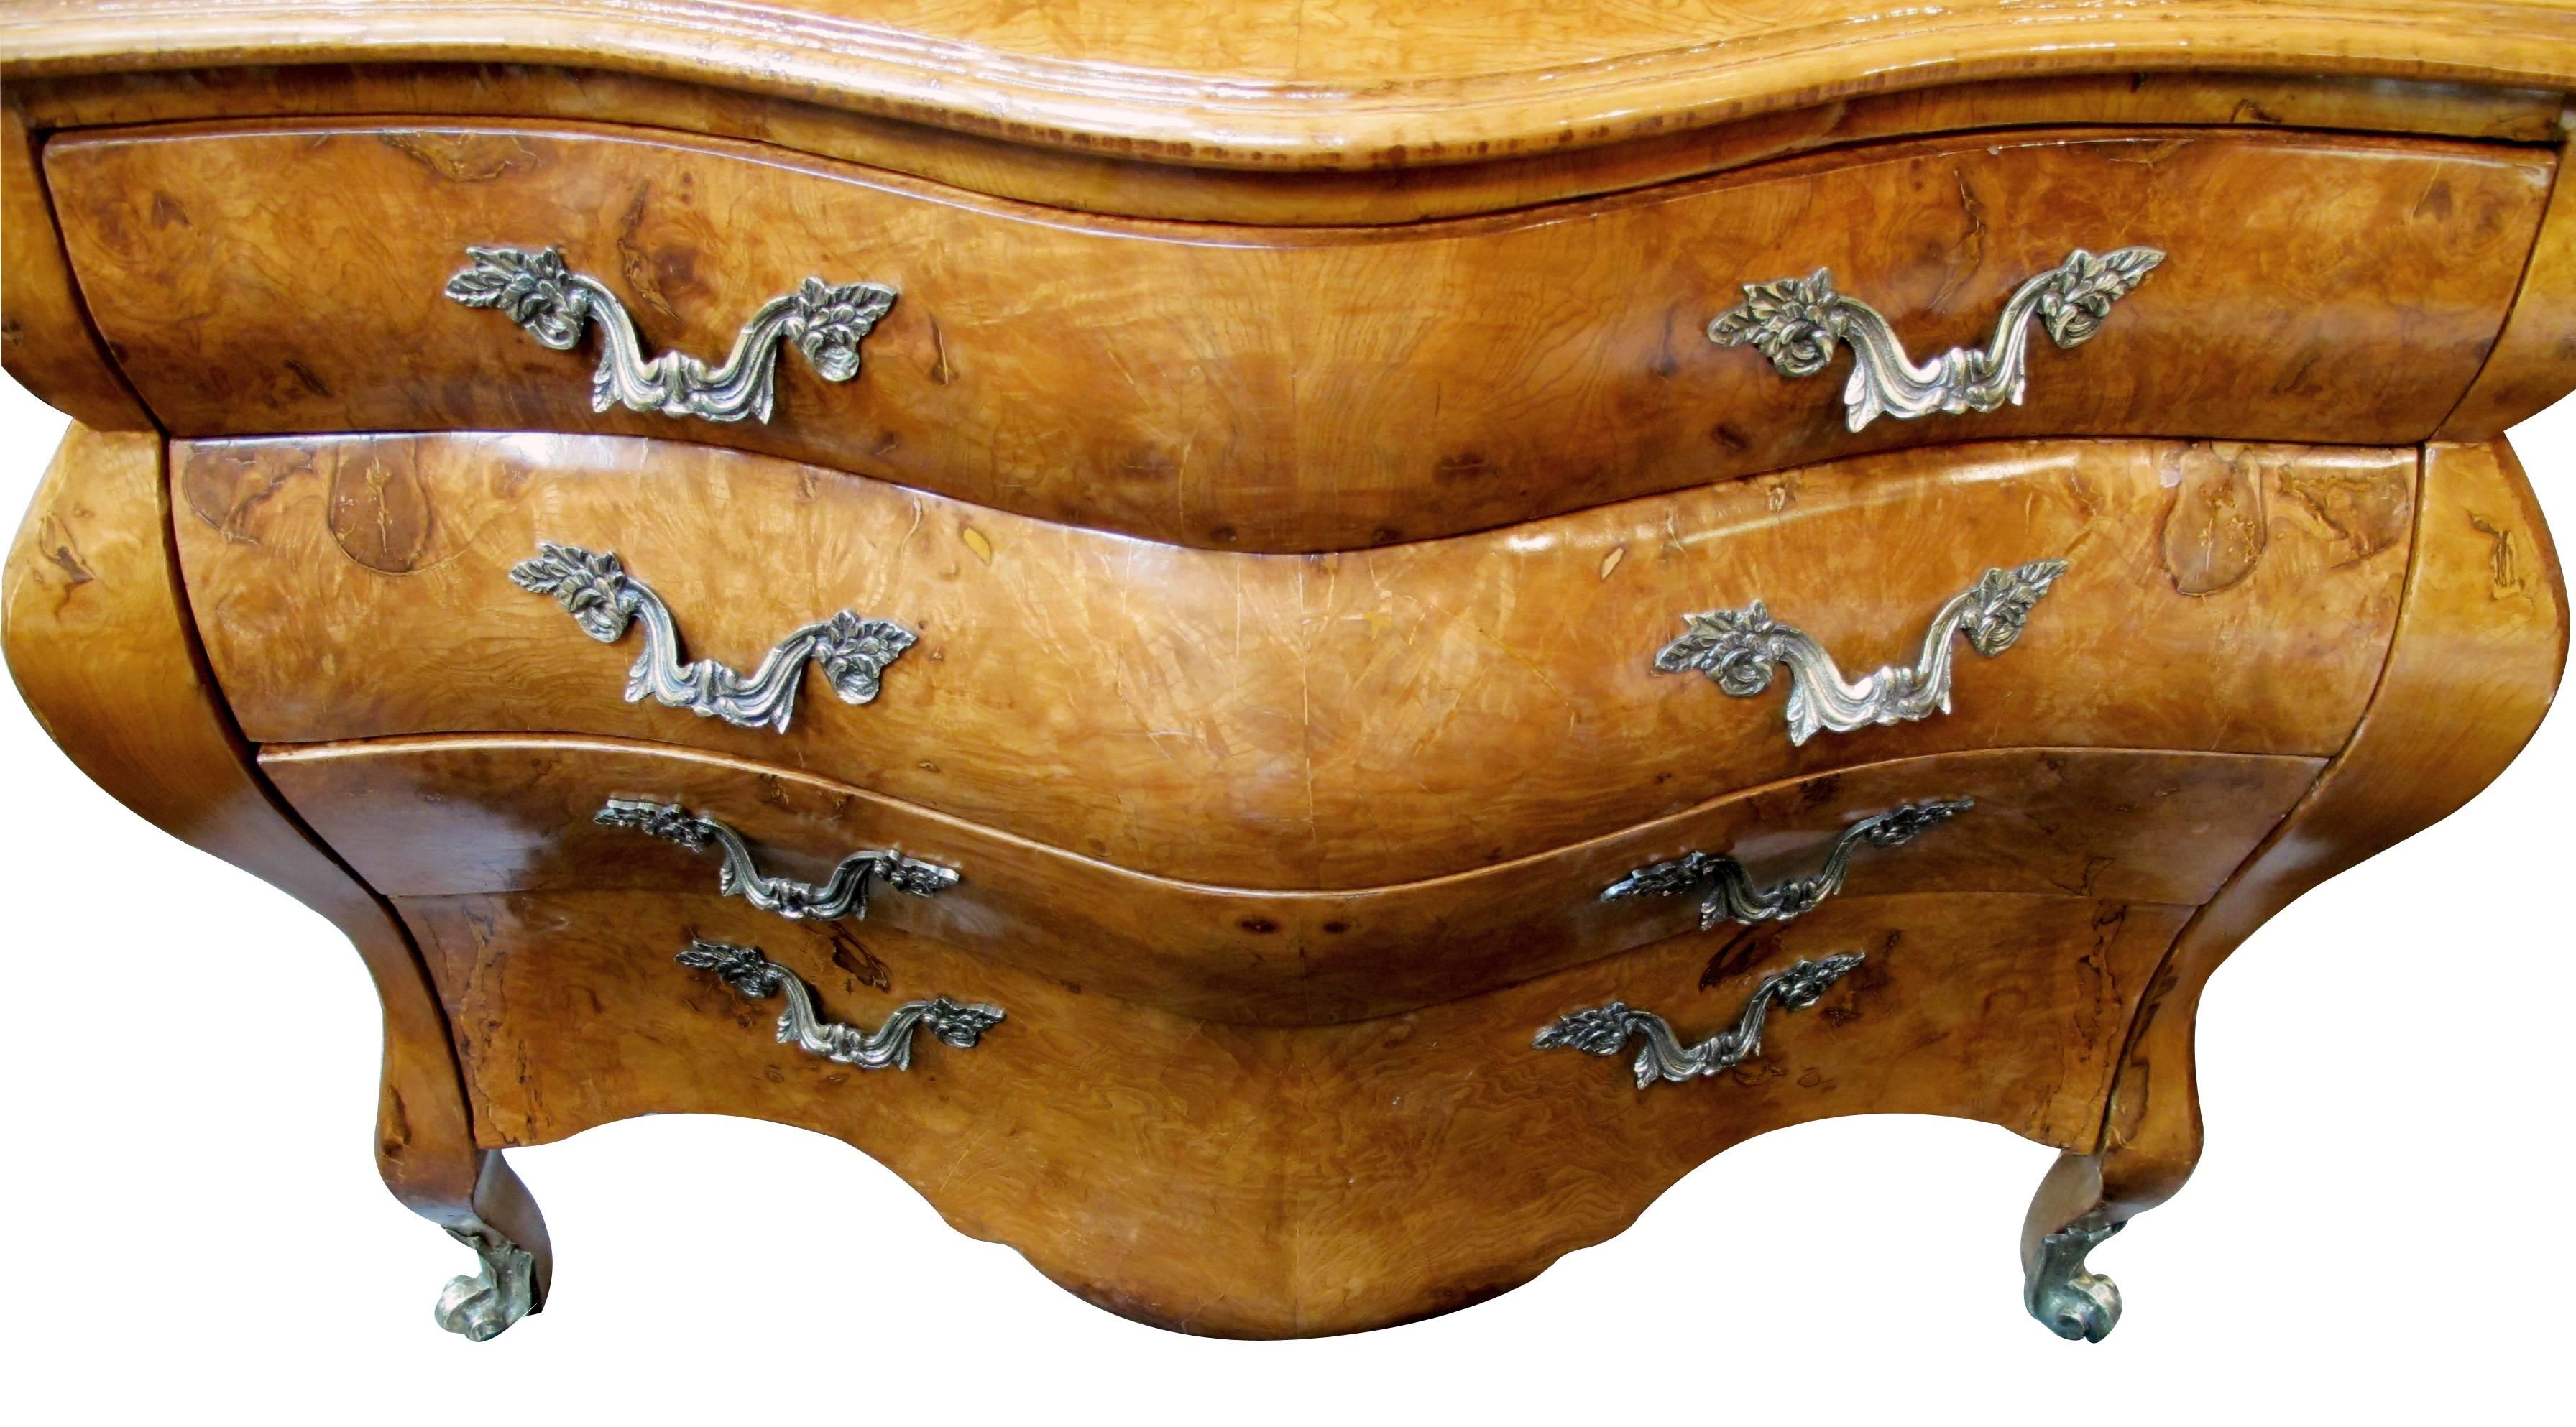 Early 20th Century Large-Scaled Italian Rococo Style Olive Wood Bombe-Form Four-Drawer Chest